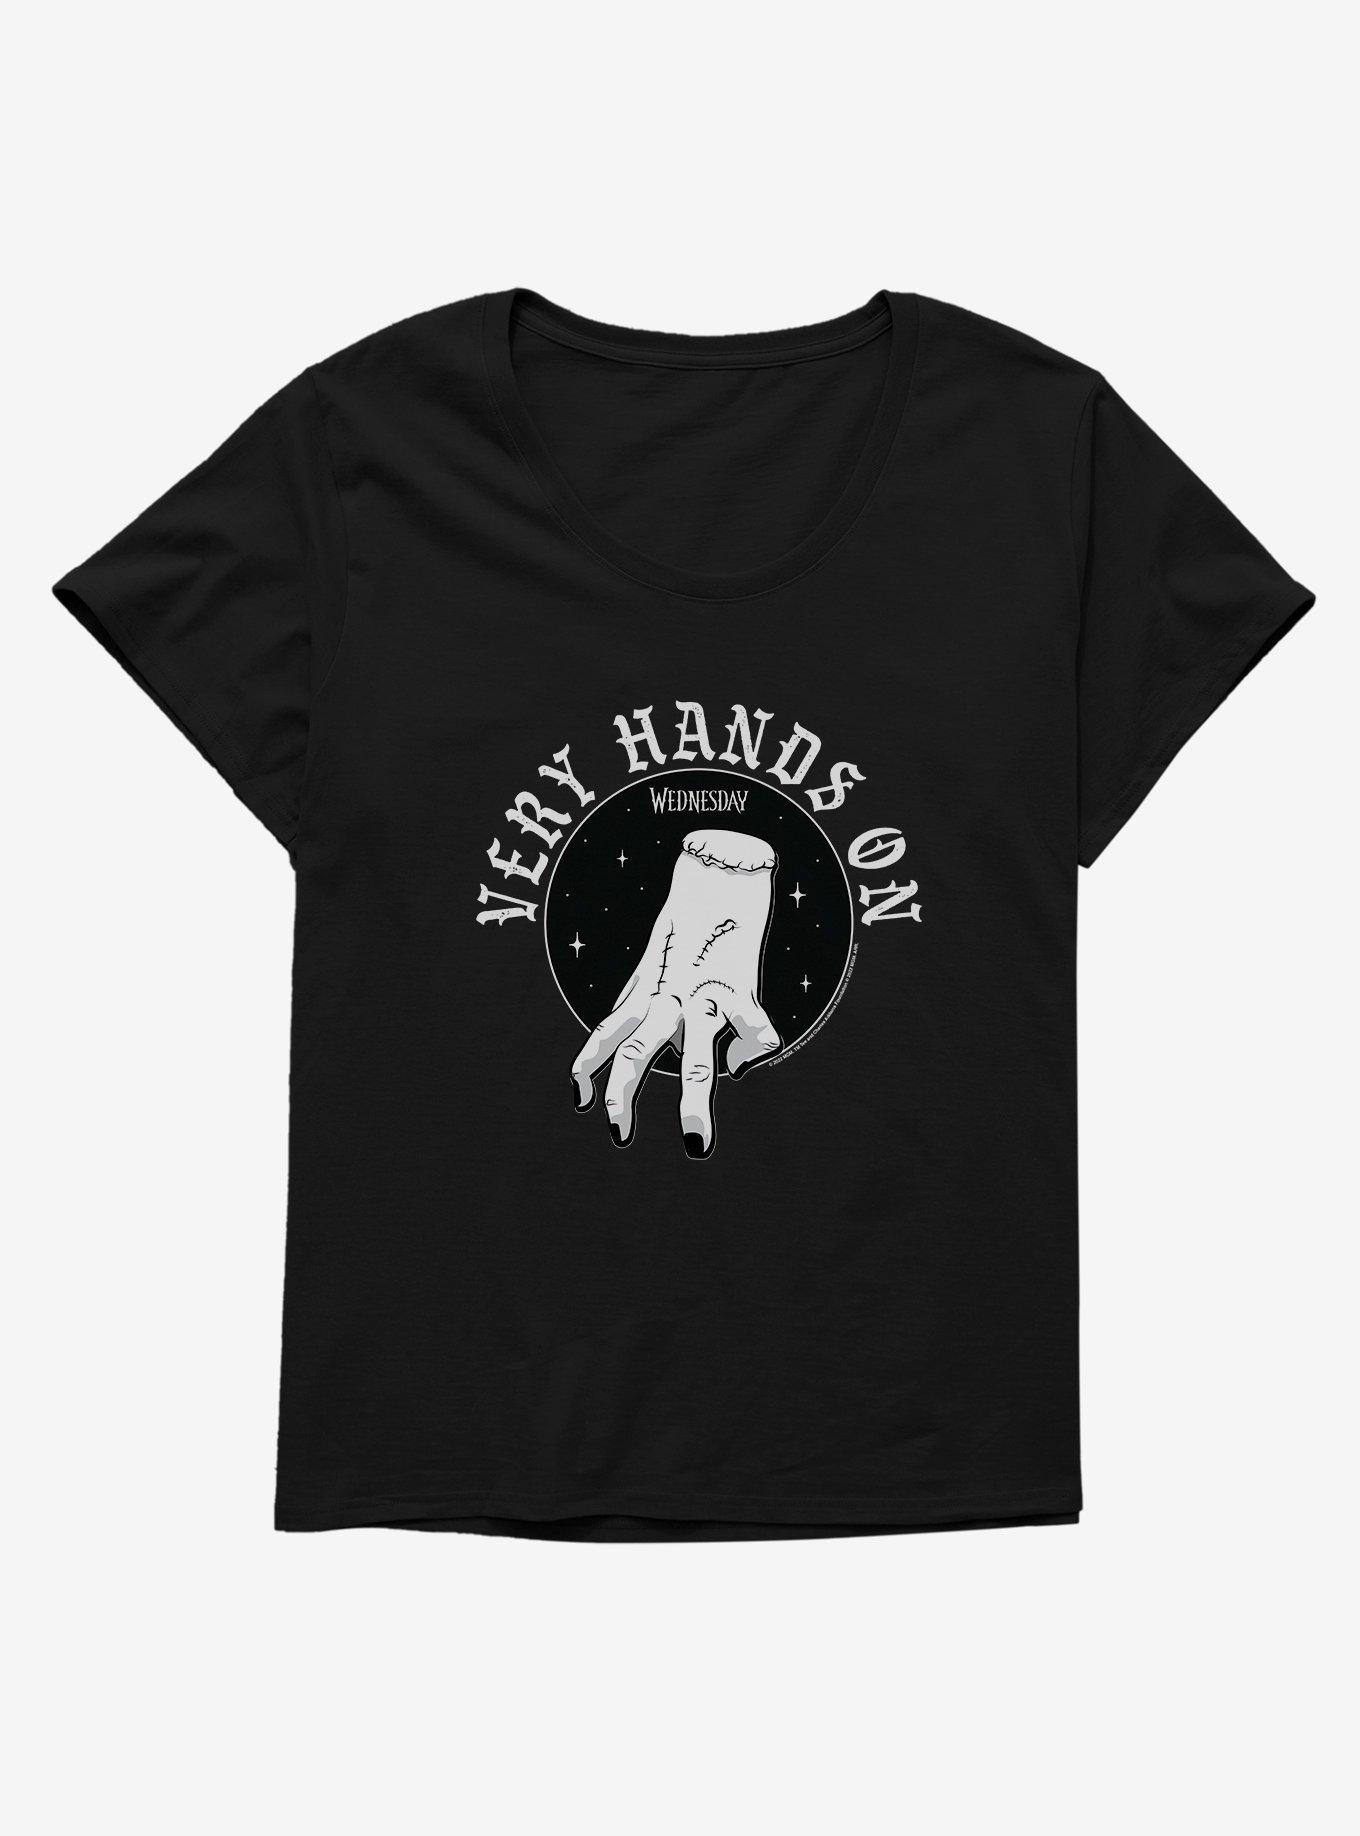 Wednesday The Thing Very Hands On Womens T-Shirt Plus Size, BLACK, hi-res